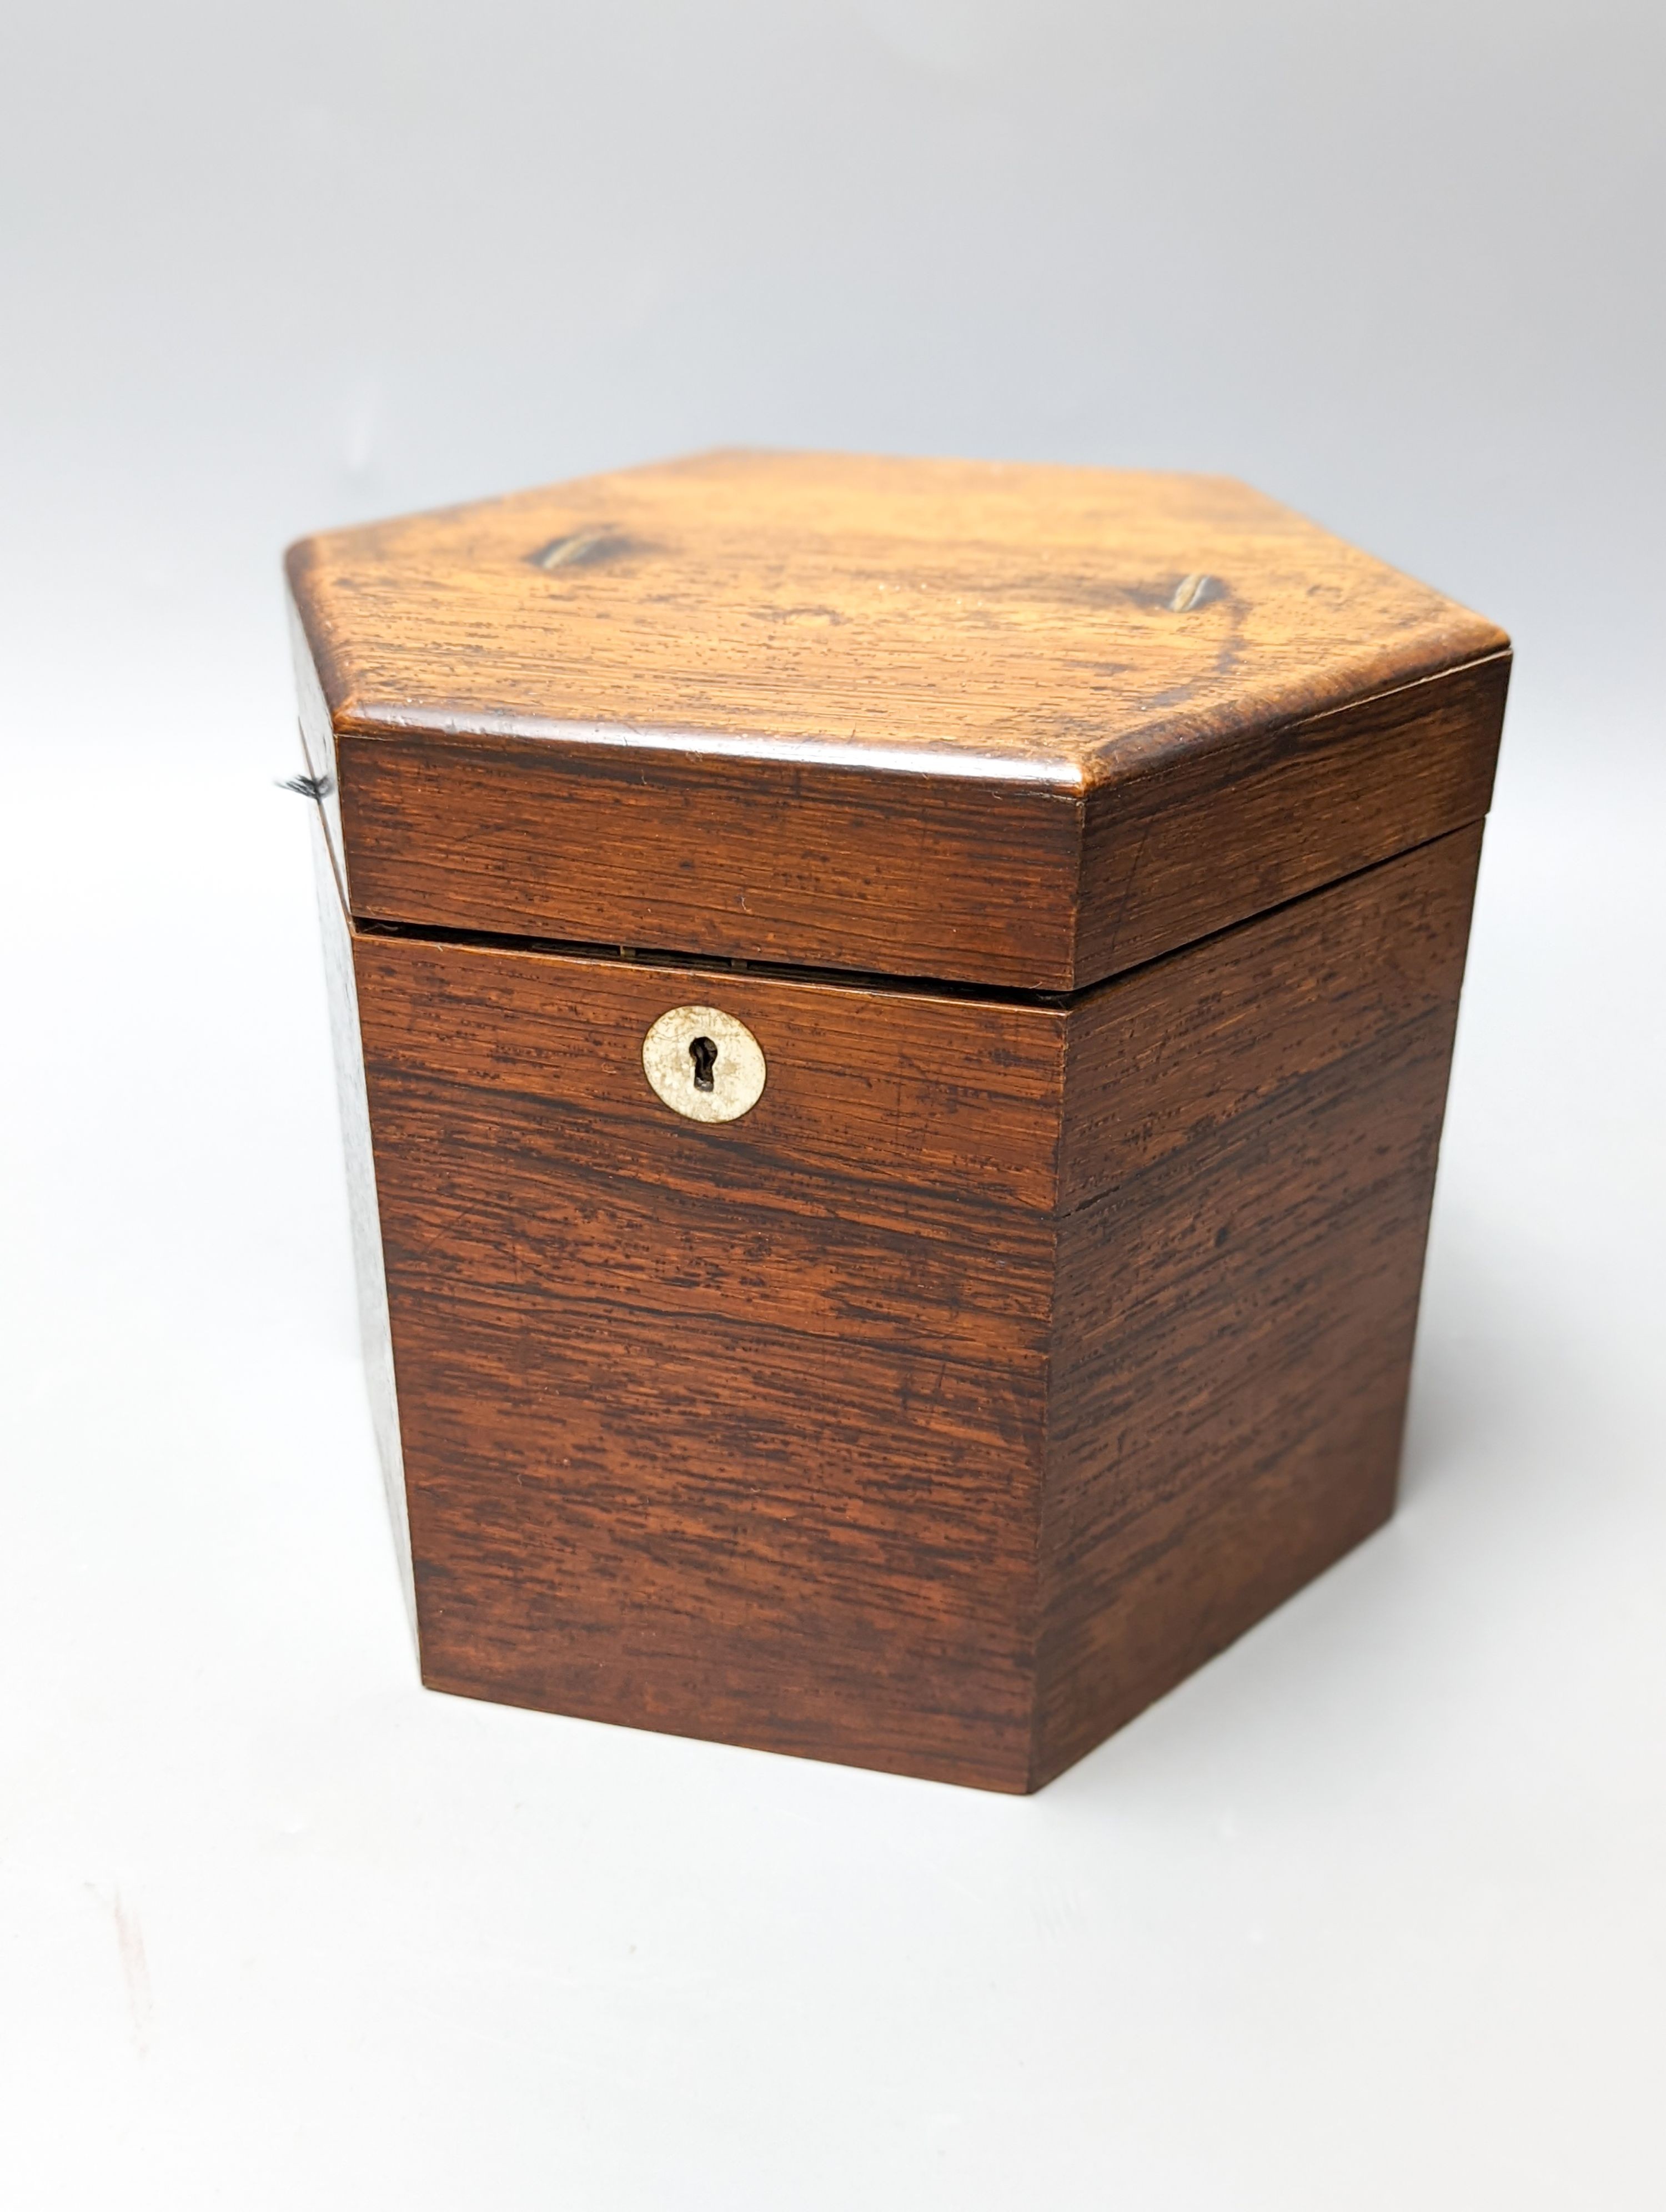 A 19th century rosewood 48 button cased concertina, by Butler, Haymarket, London, rosewood box, damage